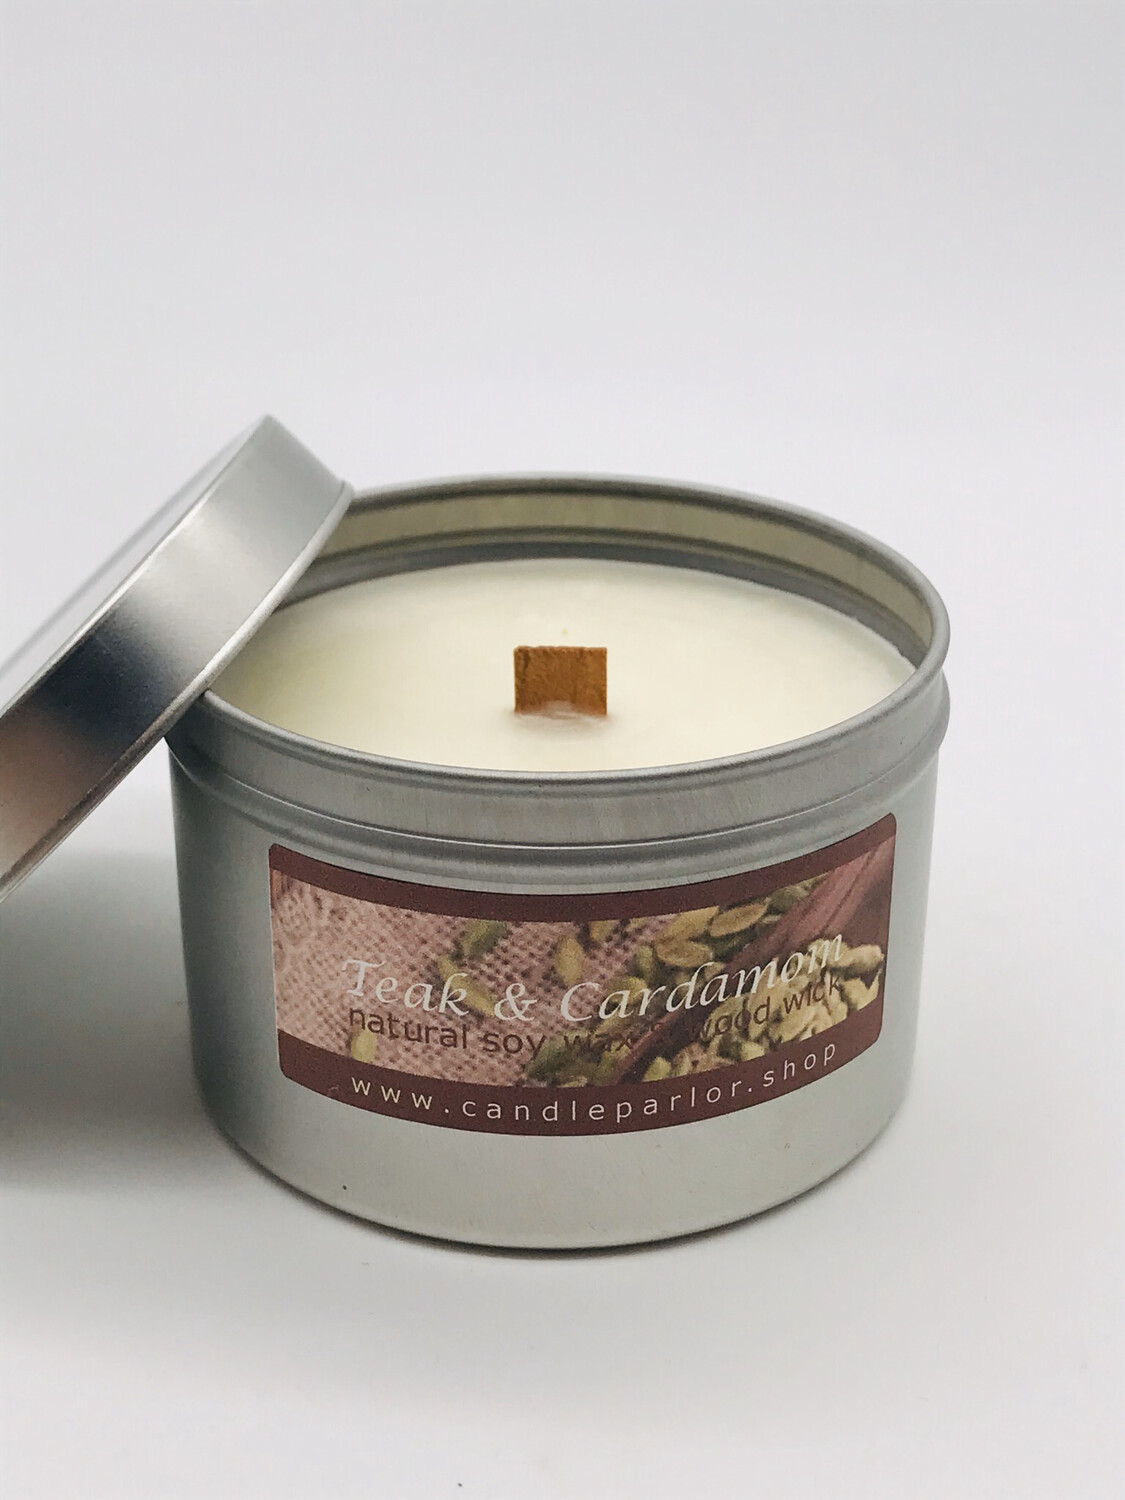 Teak & Cardamon Scented Soy Wax Candle with Wood Wick, 6 oz Tin.